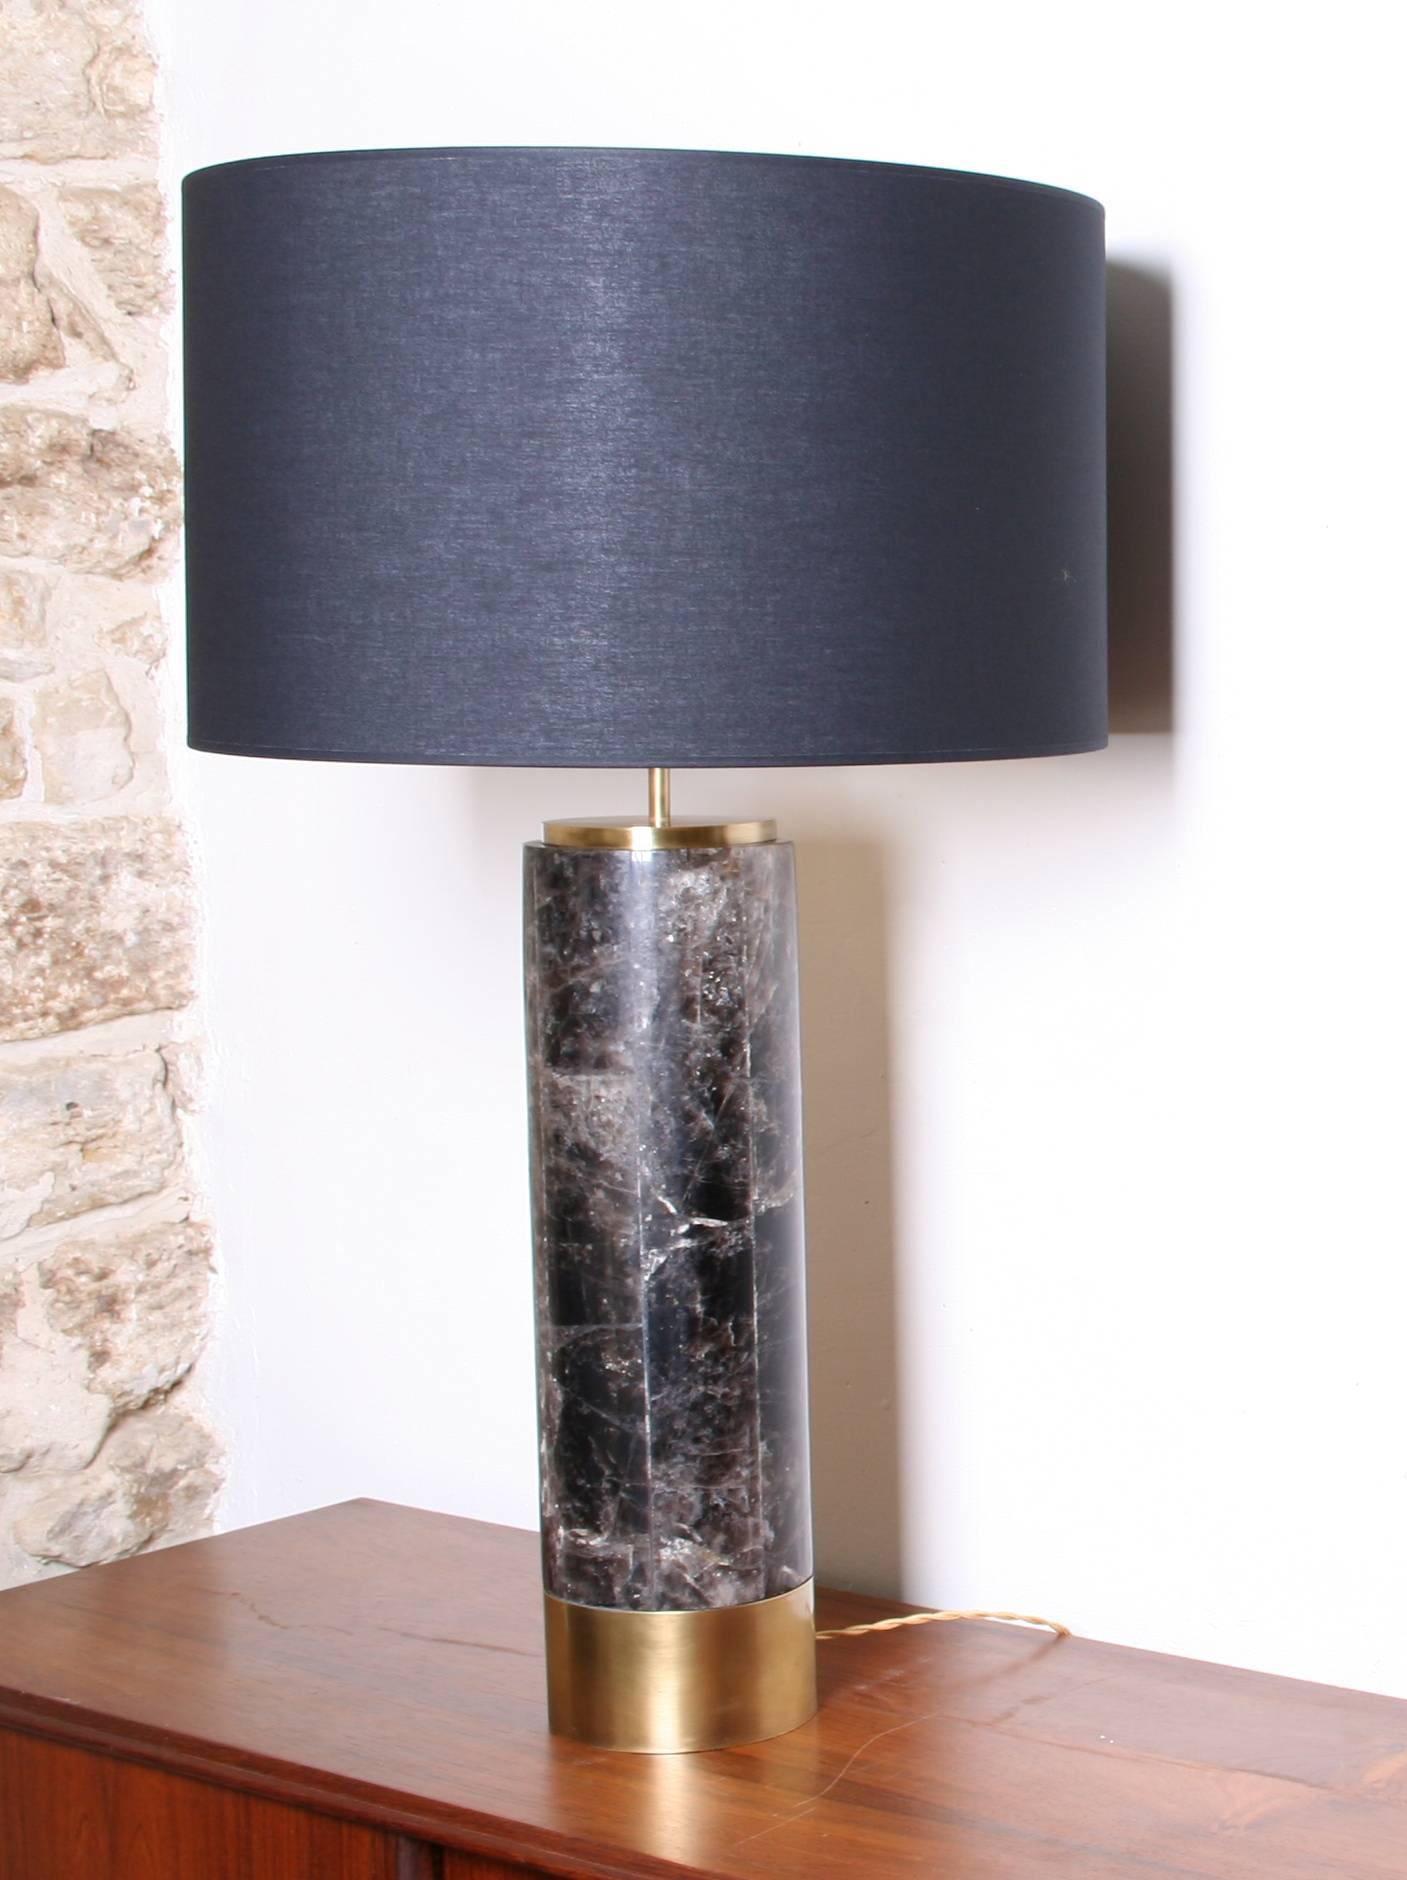 Contemporary Pair of Table Lamps in Smokey Quartz and Brass, Model Kristalia by Arriau For Sale